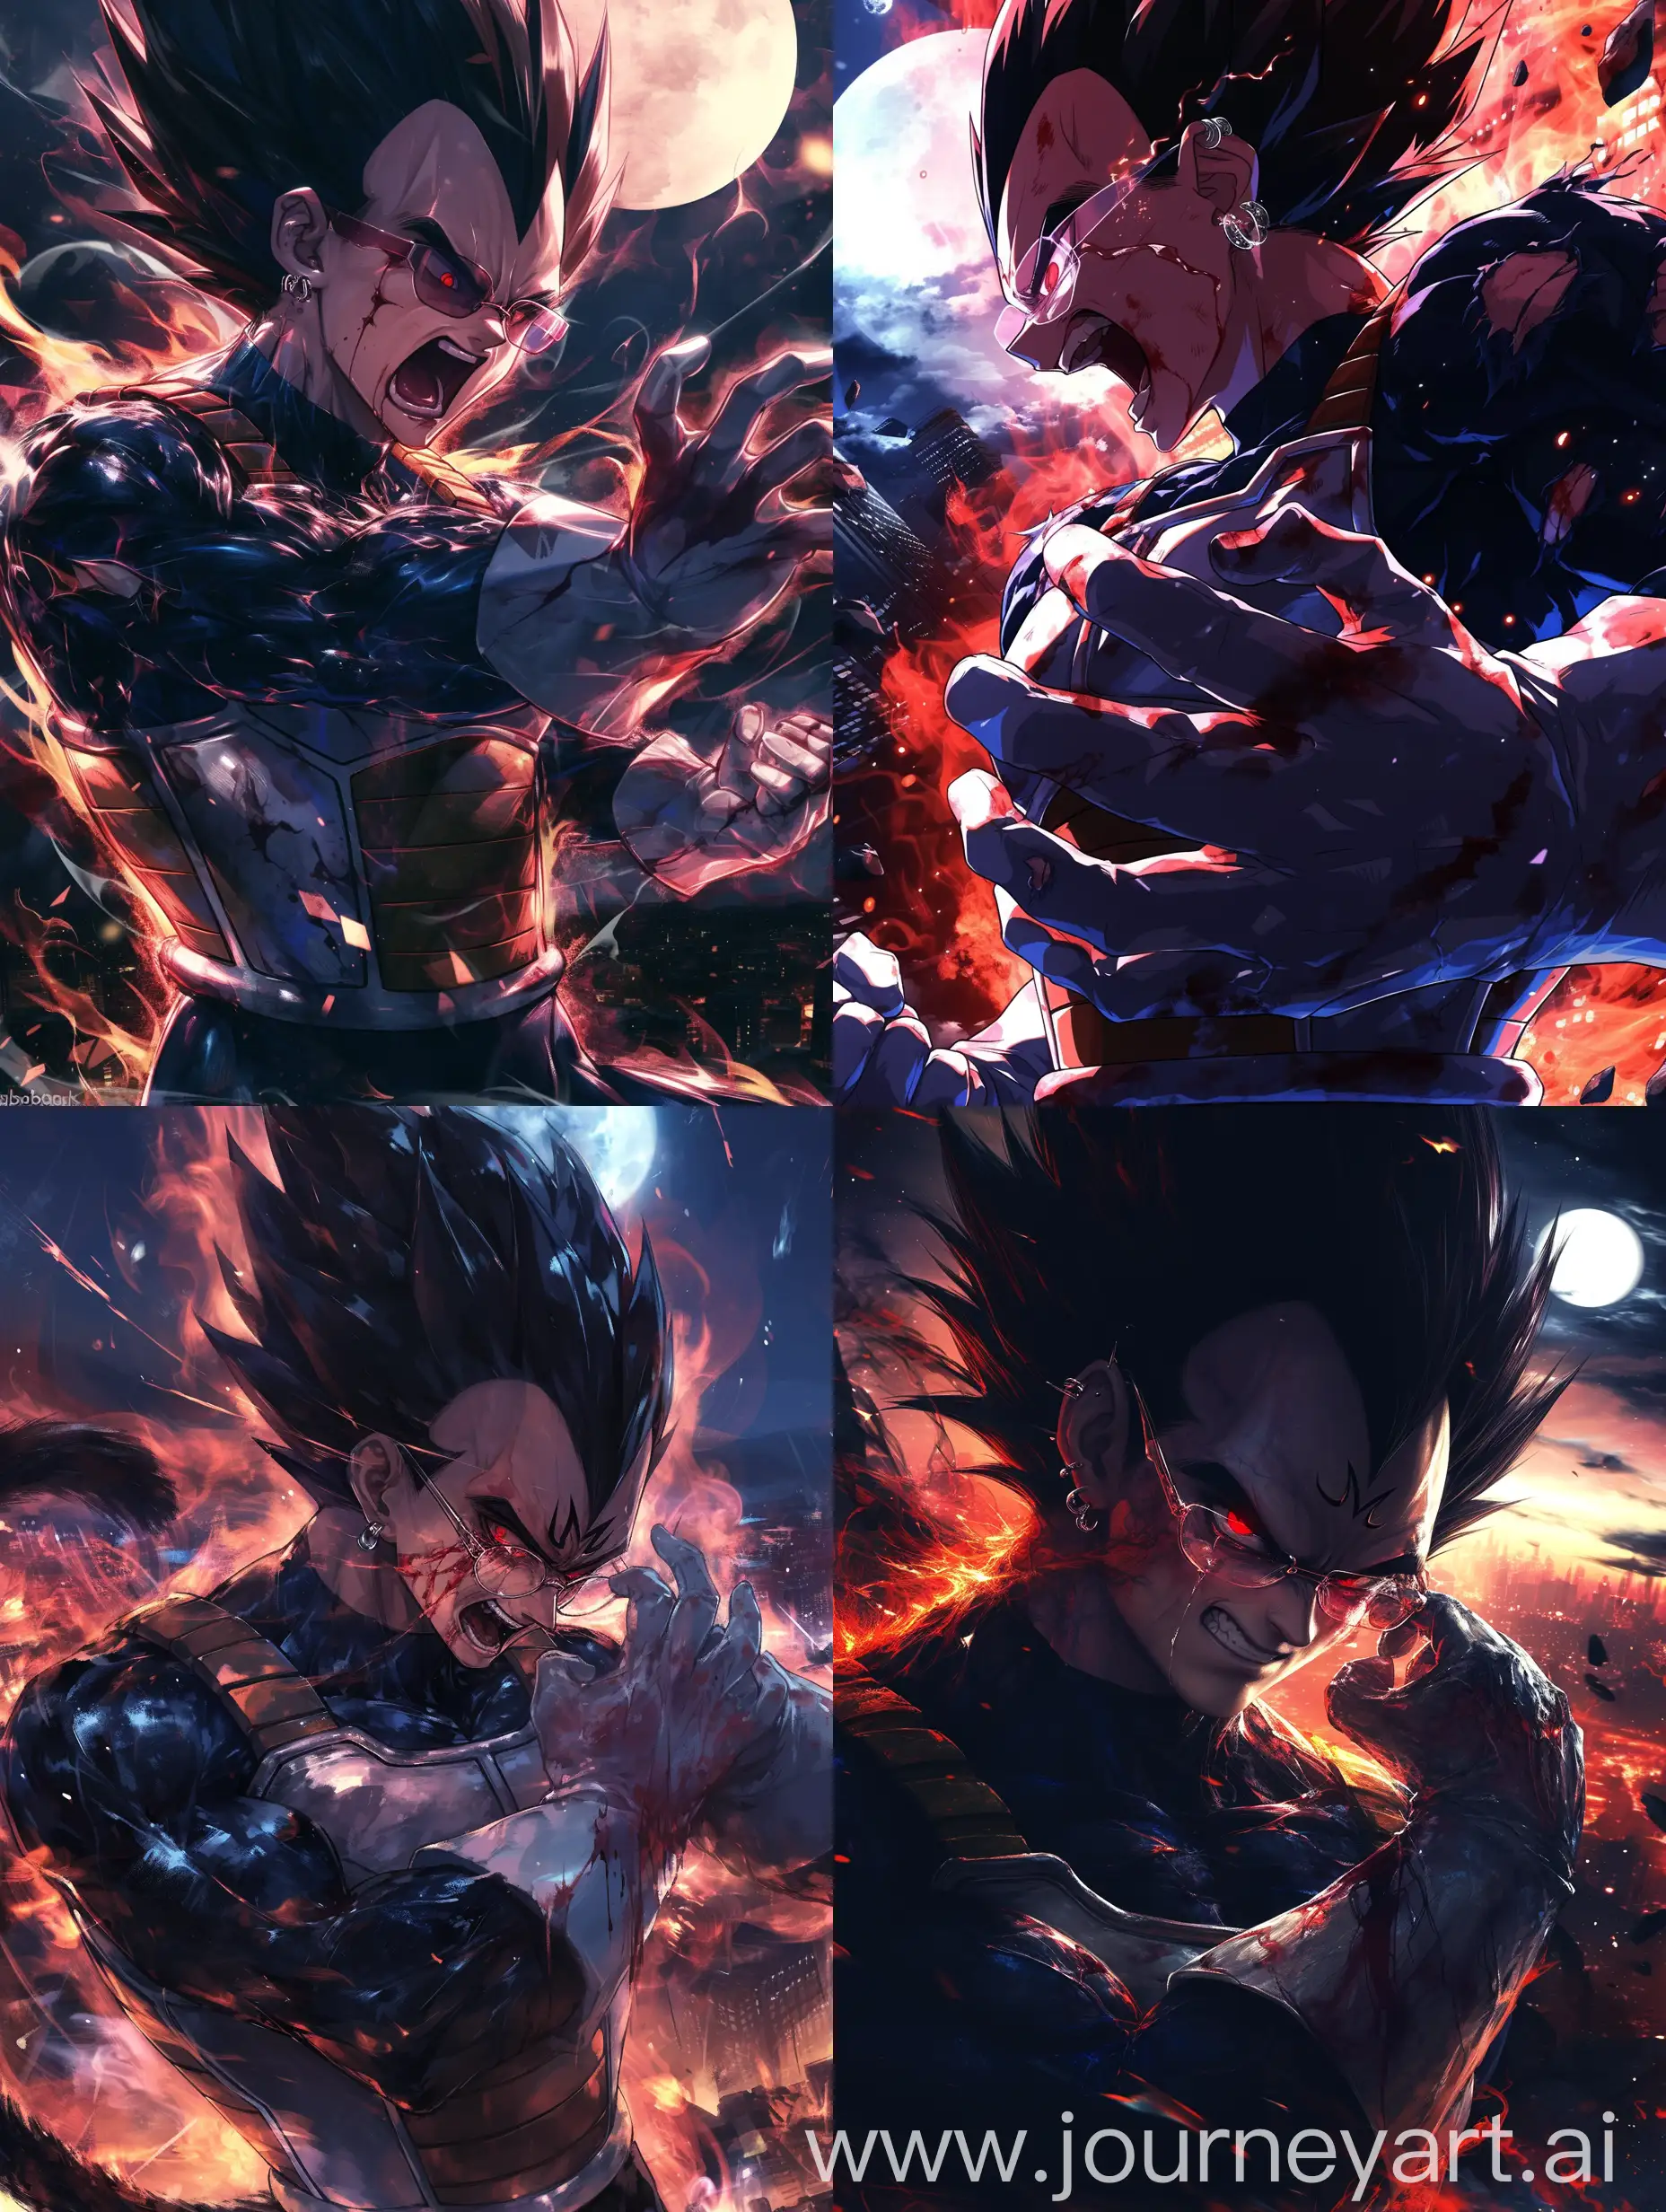 animation Niji style, Vegeta from dragonball universe, attractive, dark blood and fire background, darkness background,  aggressive, killer type, dark, piercings, e-boy, dark, dark blackground, wearing transparent glass, city night, mystical, desperate, hand attack pose, tears, screaming, cry, moonlight, black Vegeta hair super saiyan black,  glossy face, red eyes, cosmic dark and smoke energy through his body, upper body,  still he is Vegeta and make sure the results is reference to Vegeta  --niji 6